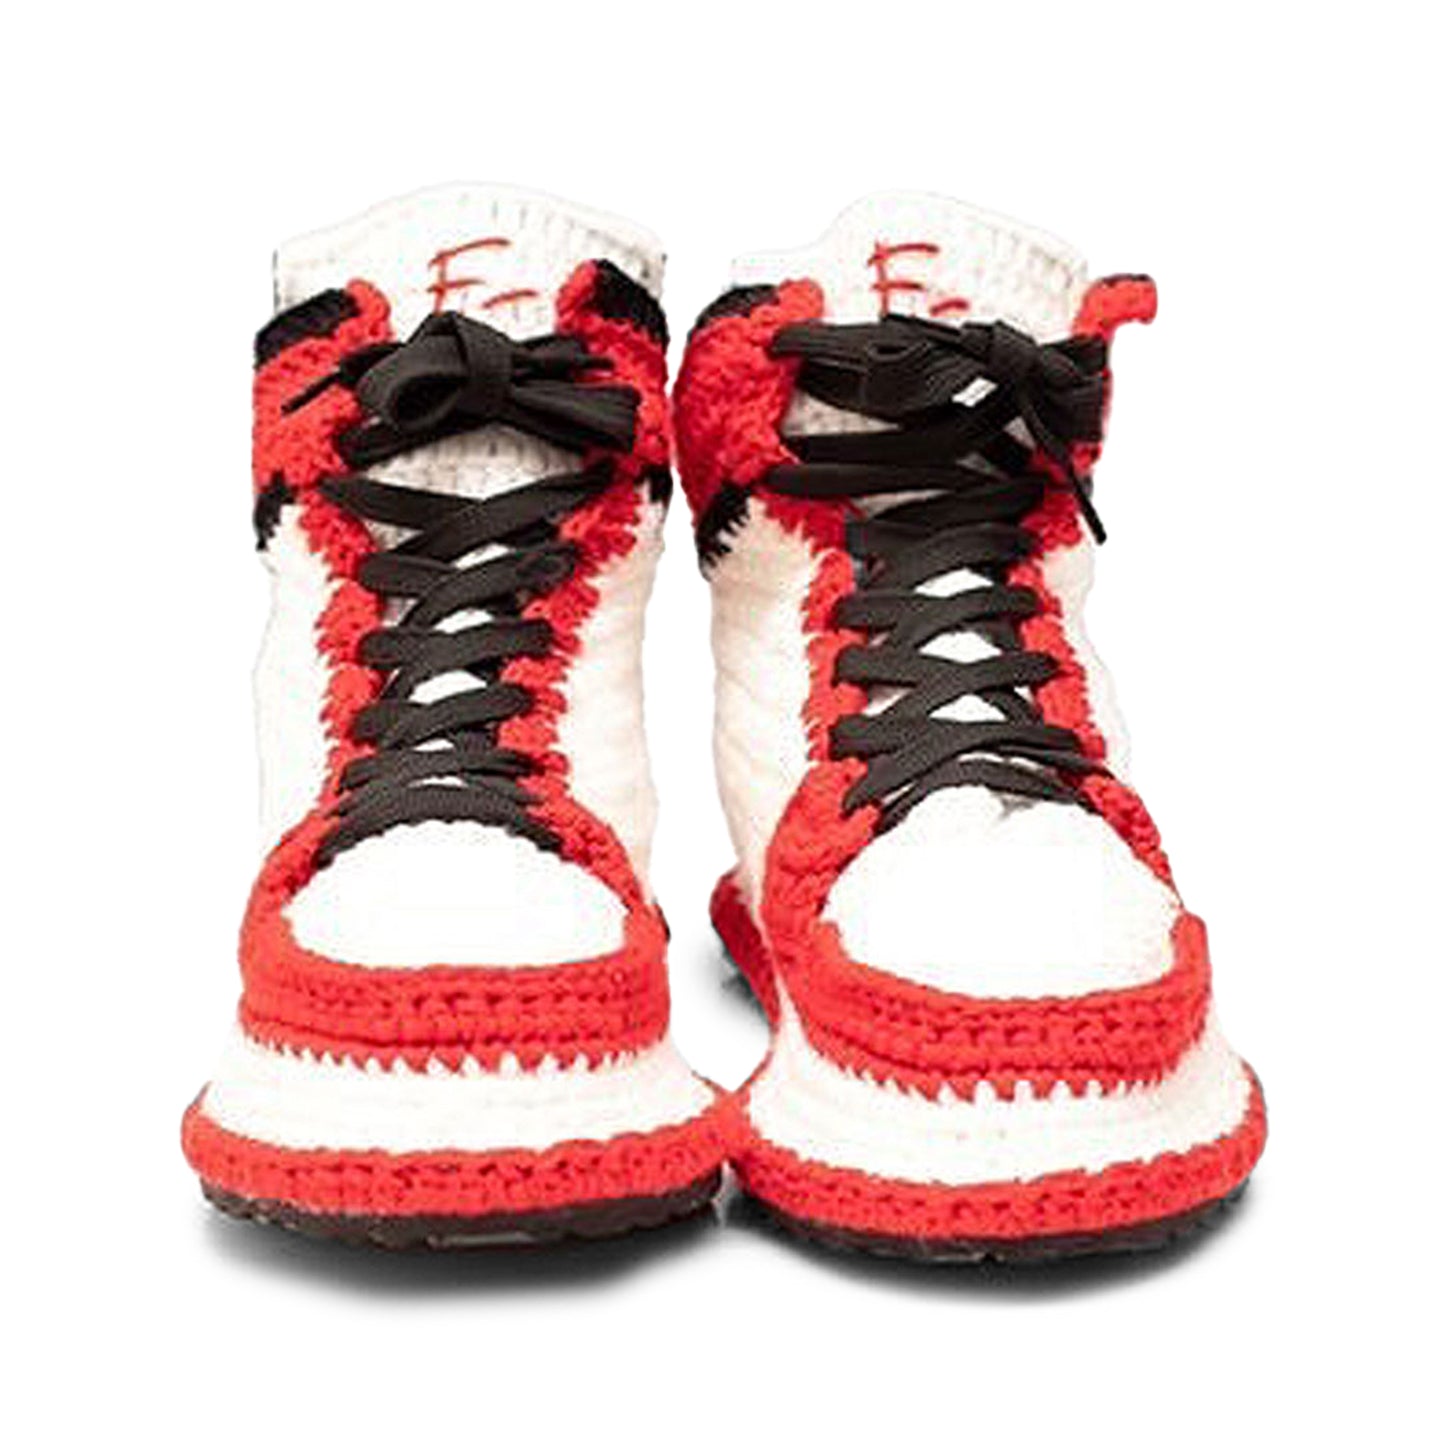 Fuggit Chicago 1 Knit House Shoes